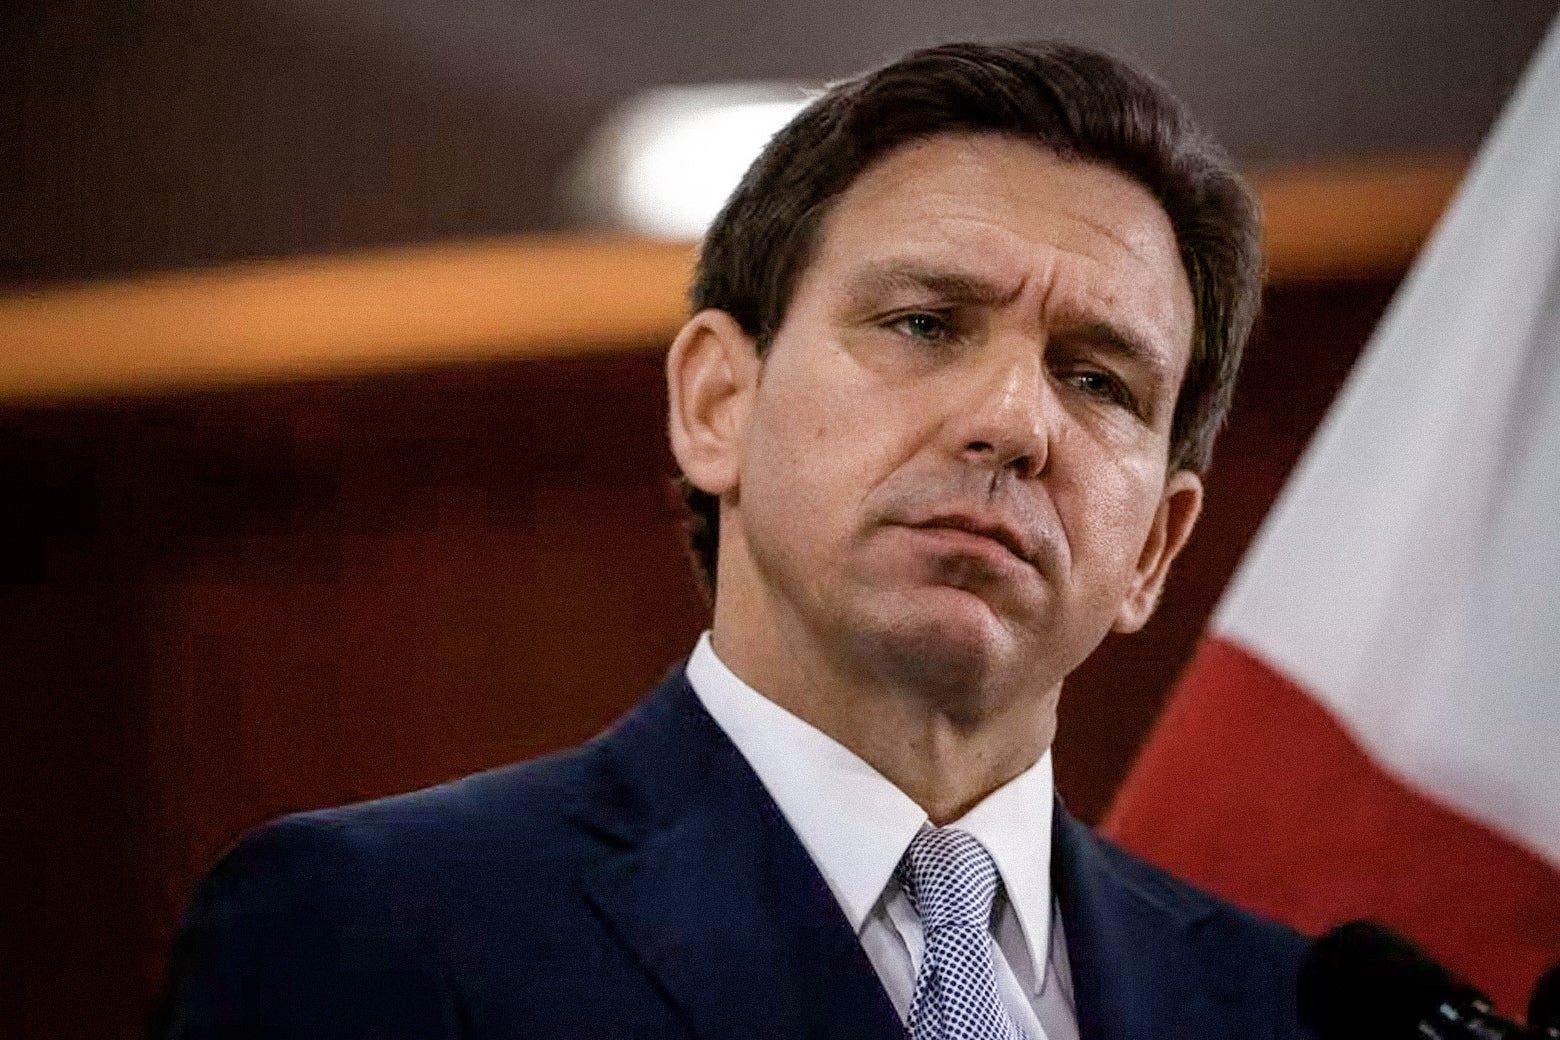 Ron DeSantis tilts his head to his left with a quizzical expression on his face at a press conference.